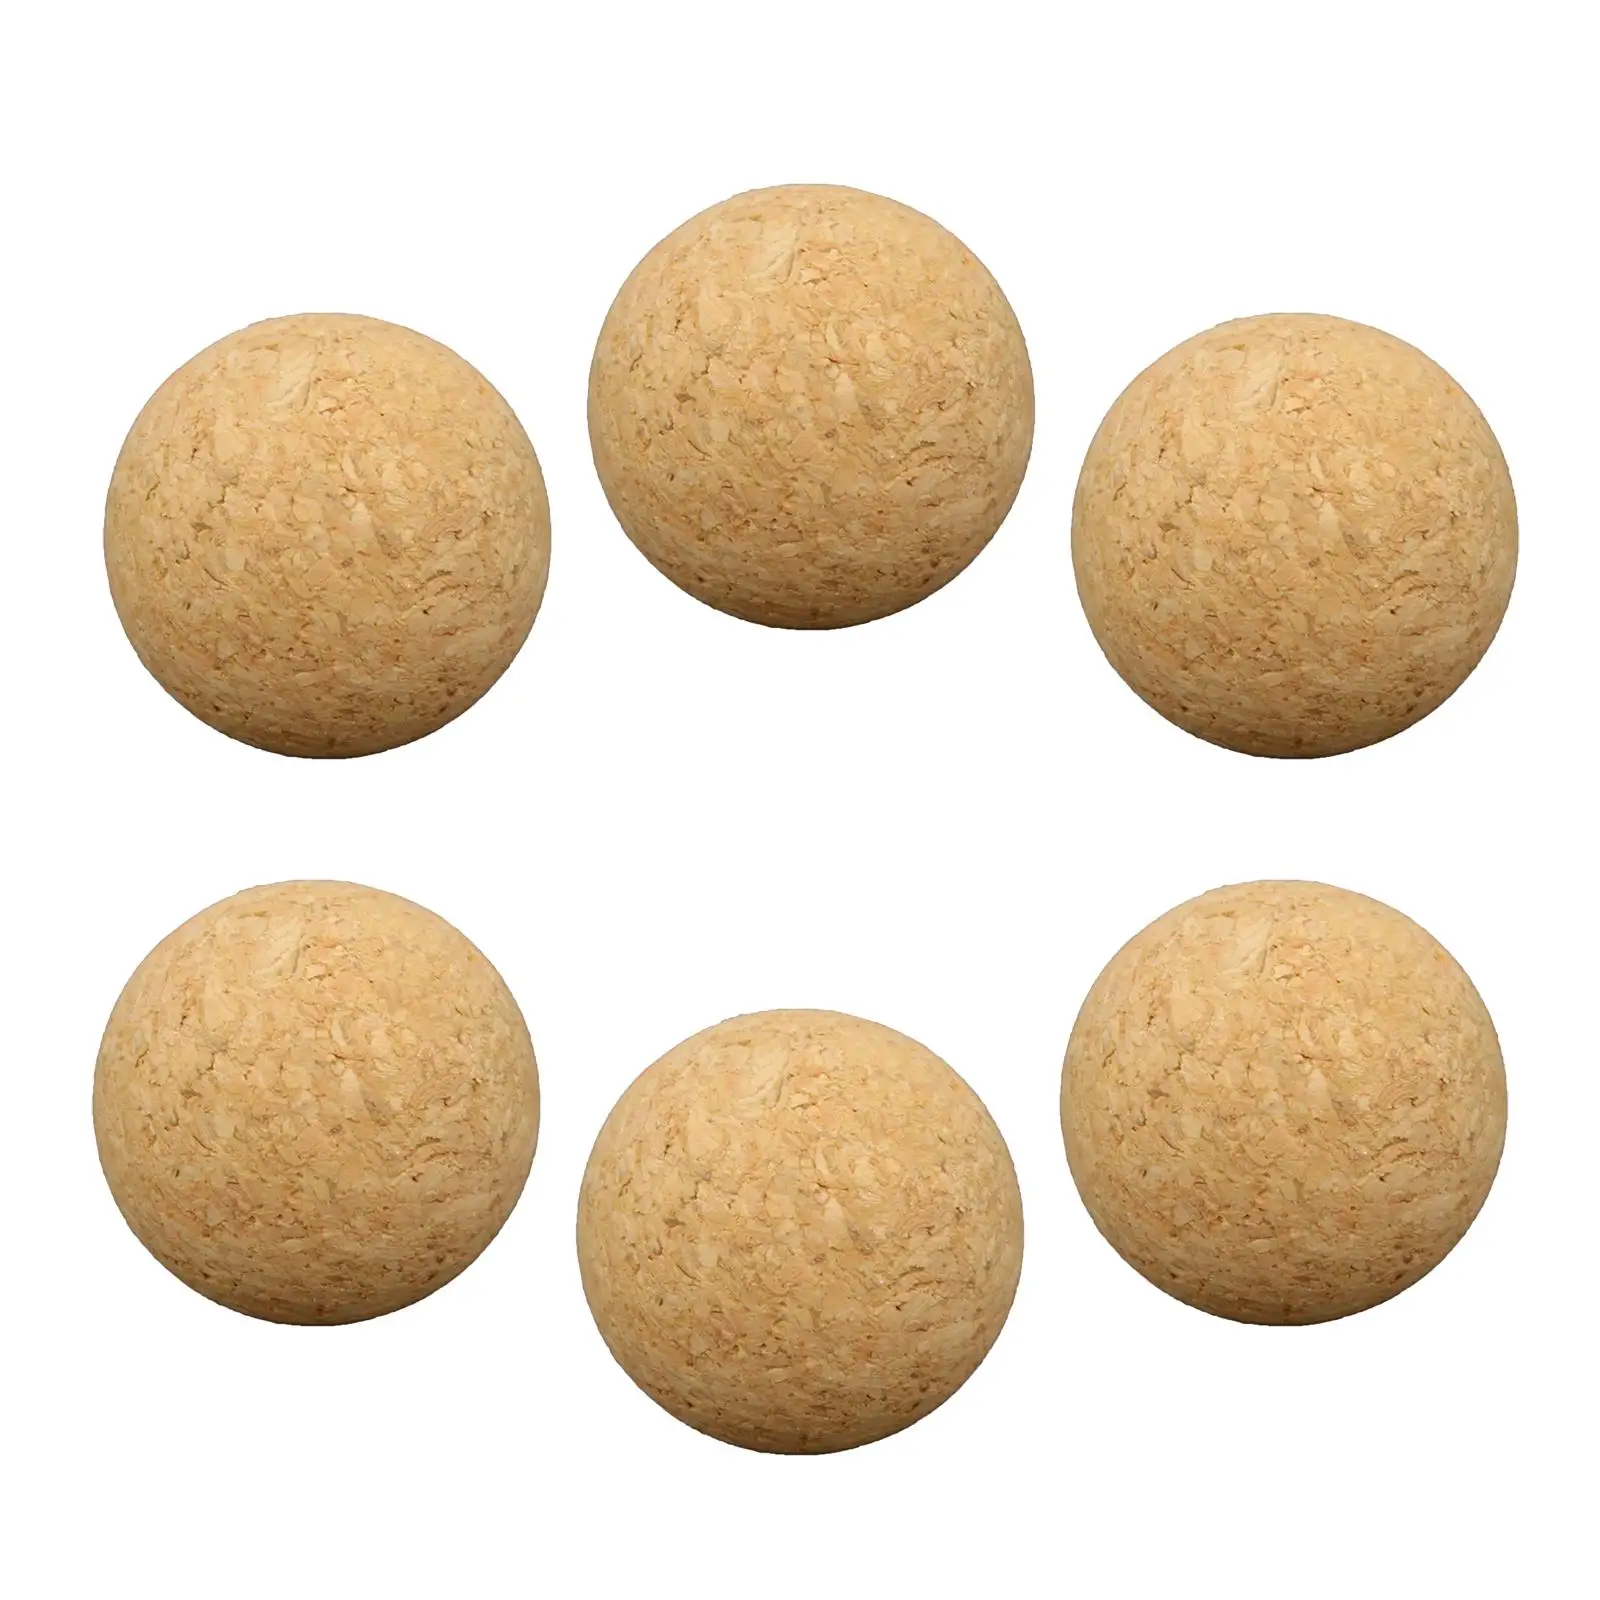 6 Pieces Table Football Cork Table Soccer 36mm Wood Foosball Game Football Machine Replacement Accessories